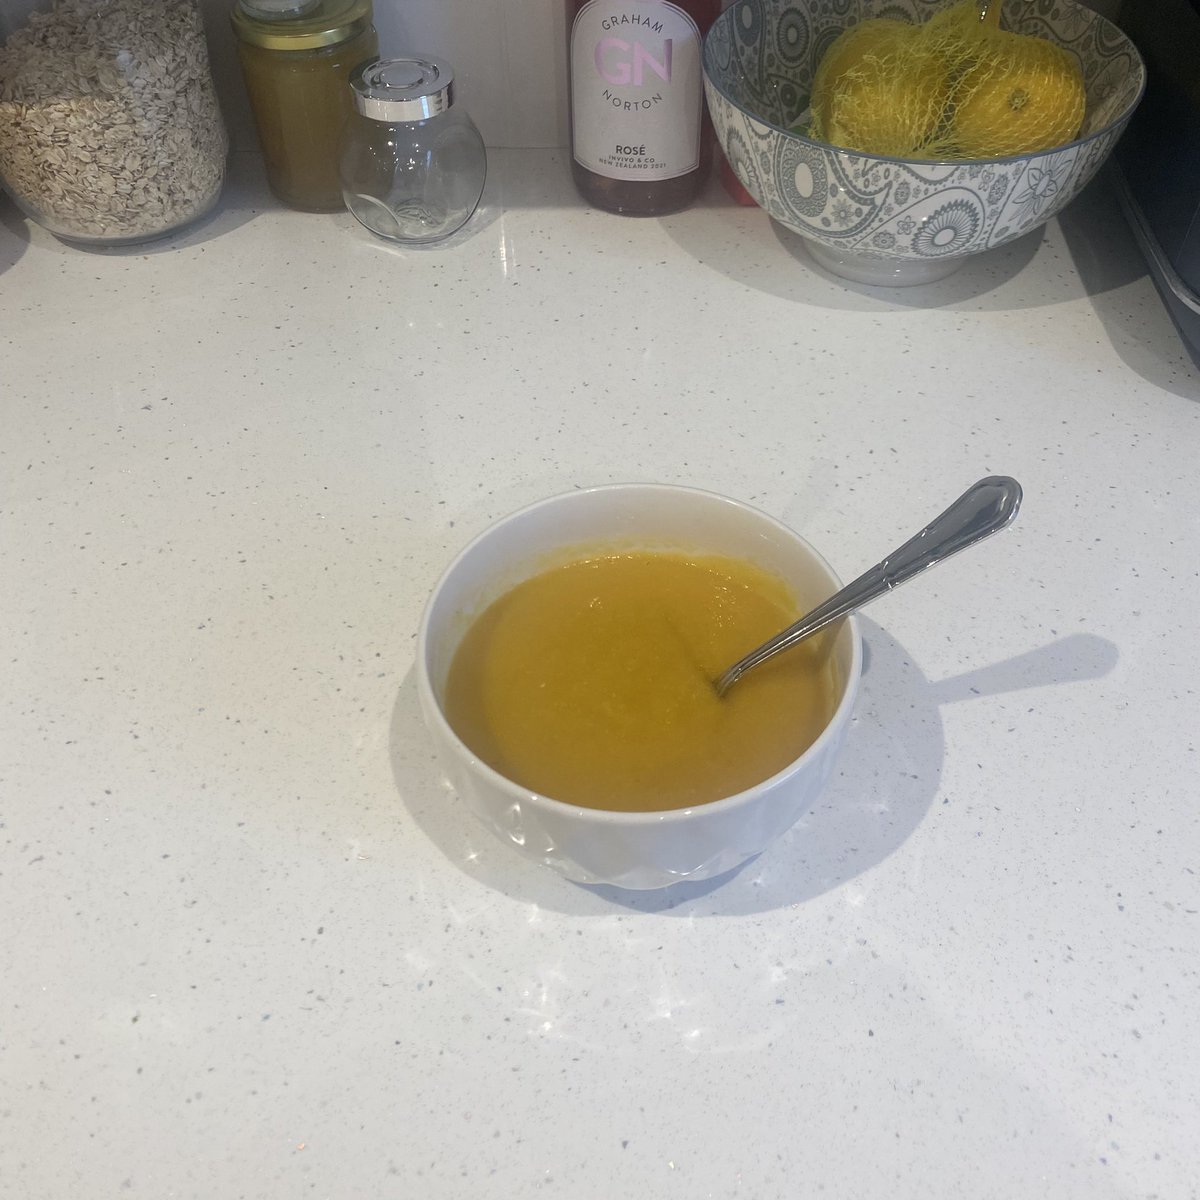 You know you’ve the best friends when they drop round a pot of soup when your in bed sick  🥰 #friends #whatfriendshipsaremadeof #feelingthelove #friendship